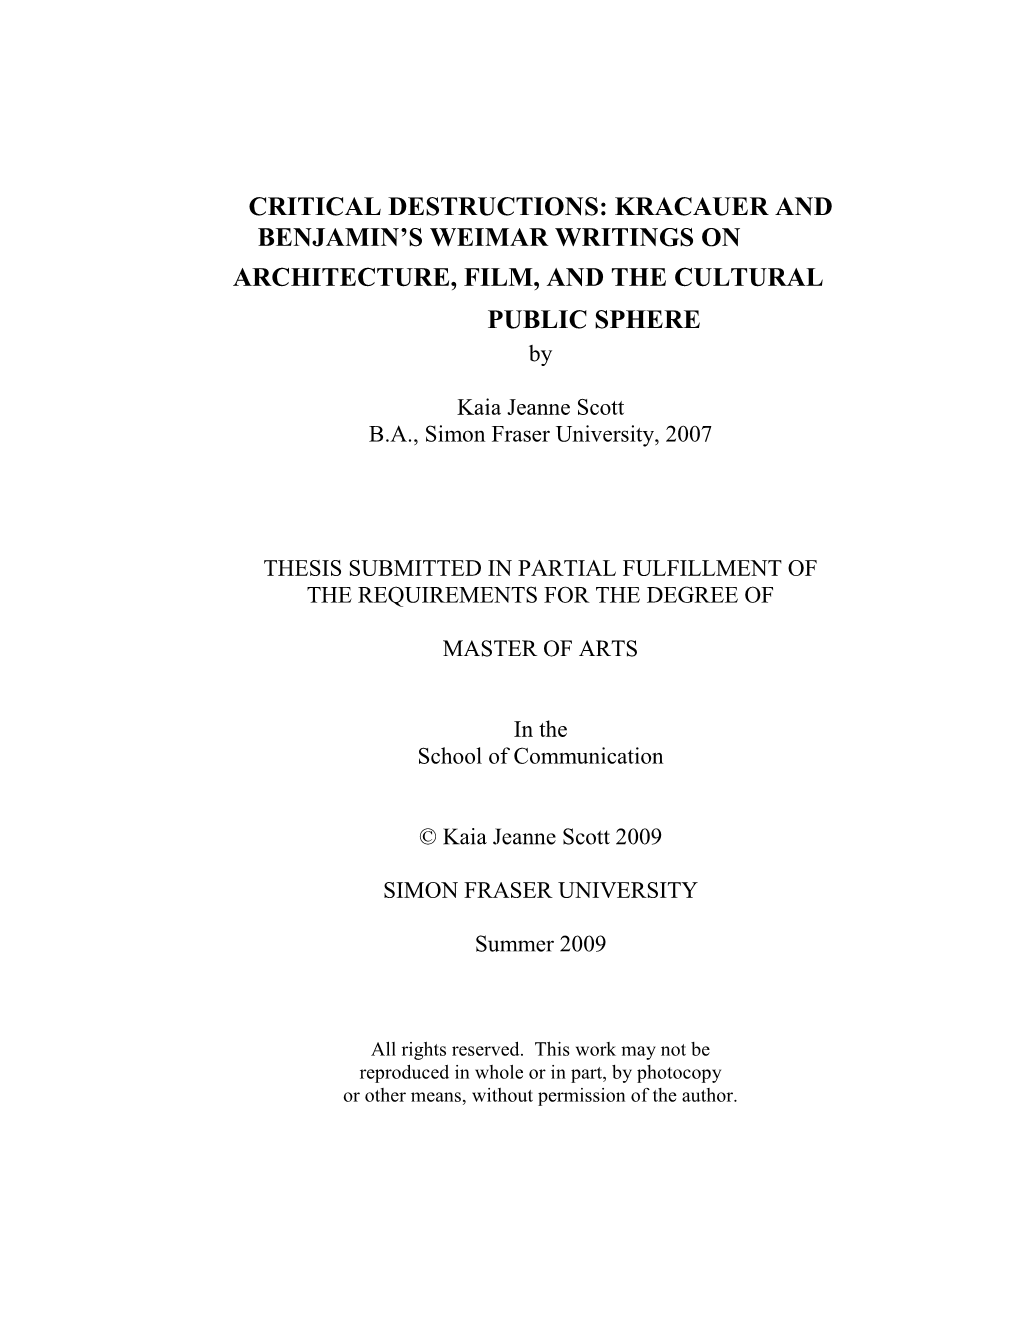 Kracauer and Benjamin's Weimar Writings on Architectureo Film, and the Cultural Public Sphere